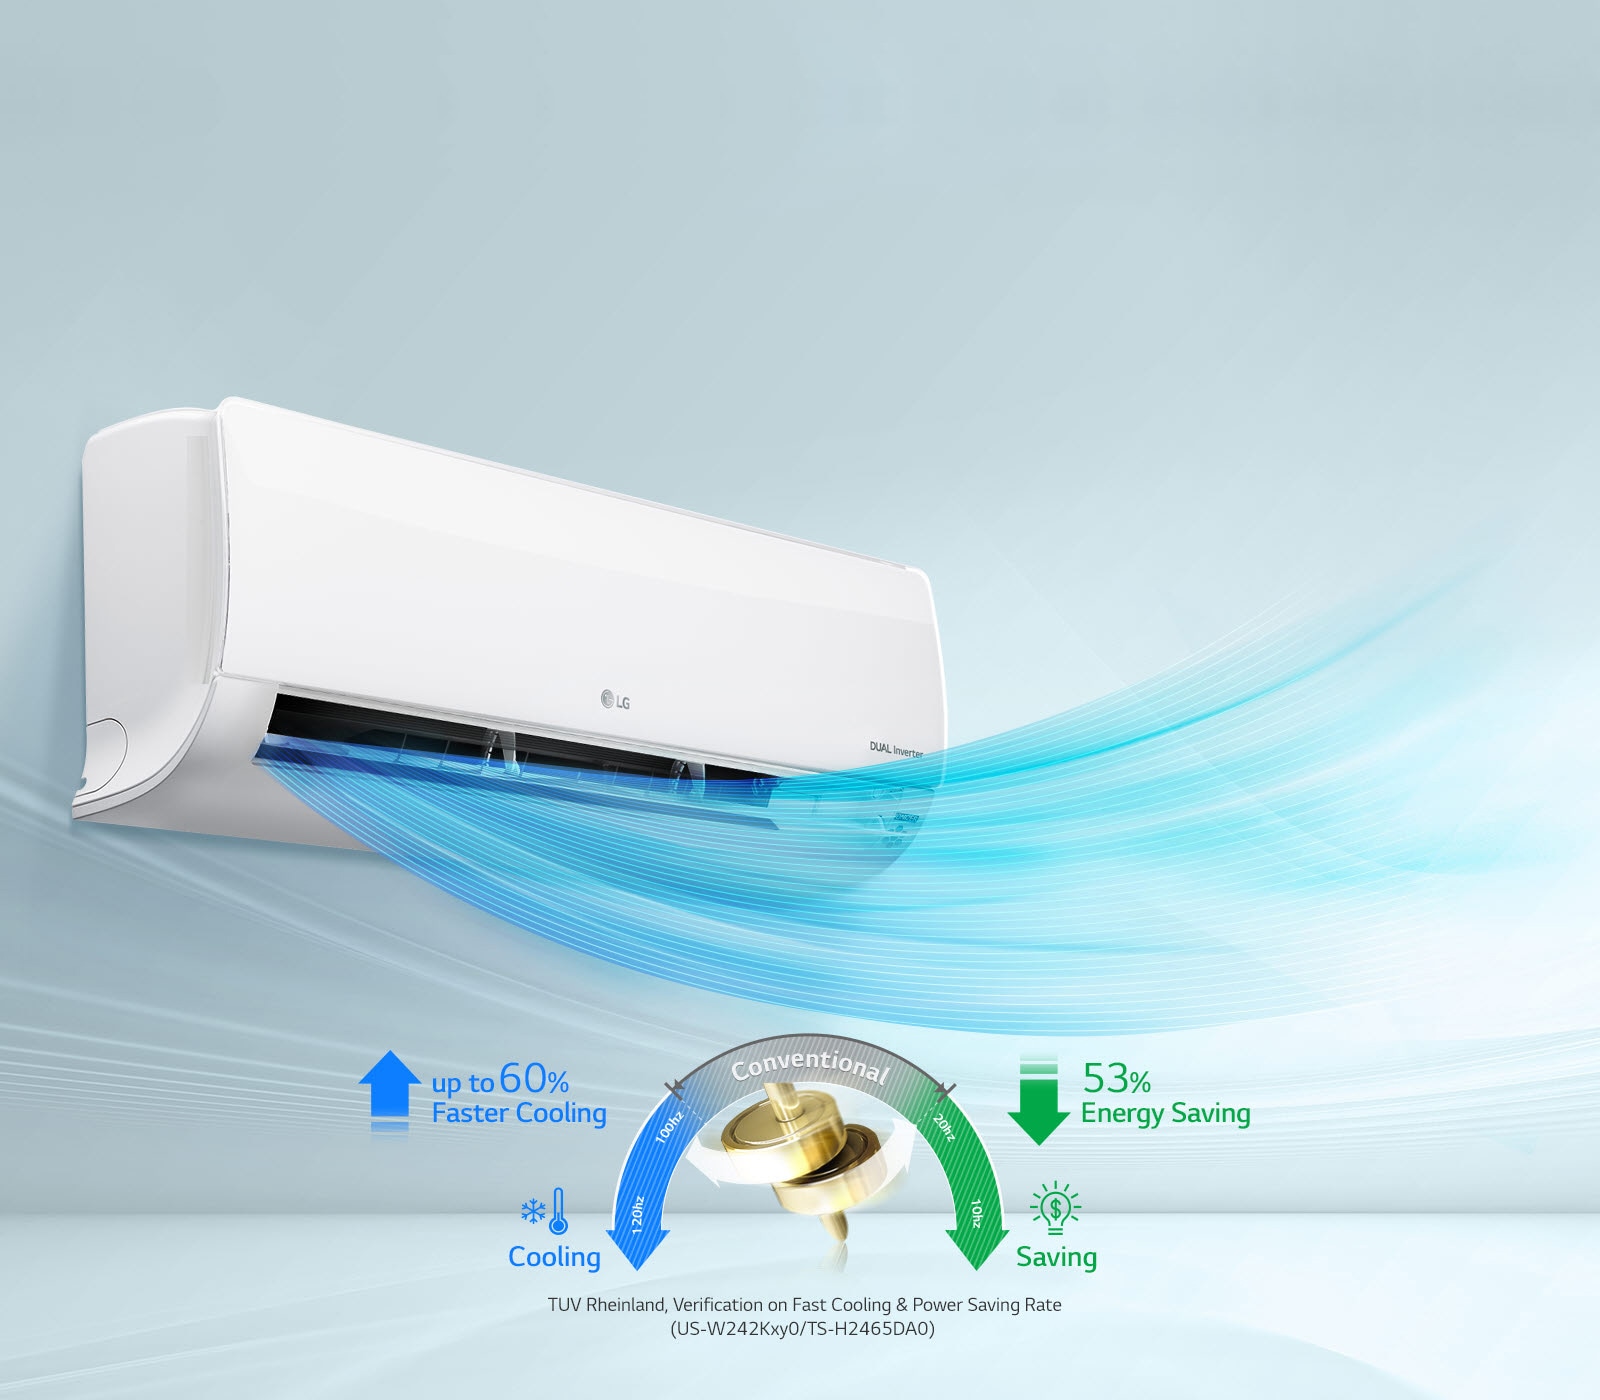 Energy Saving & fast cooling3